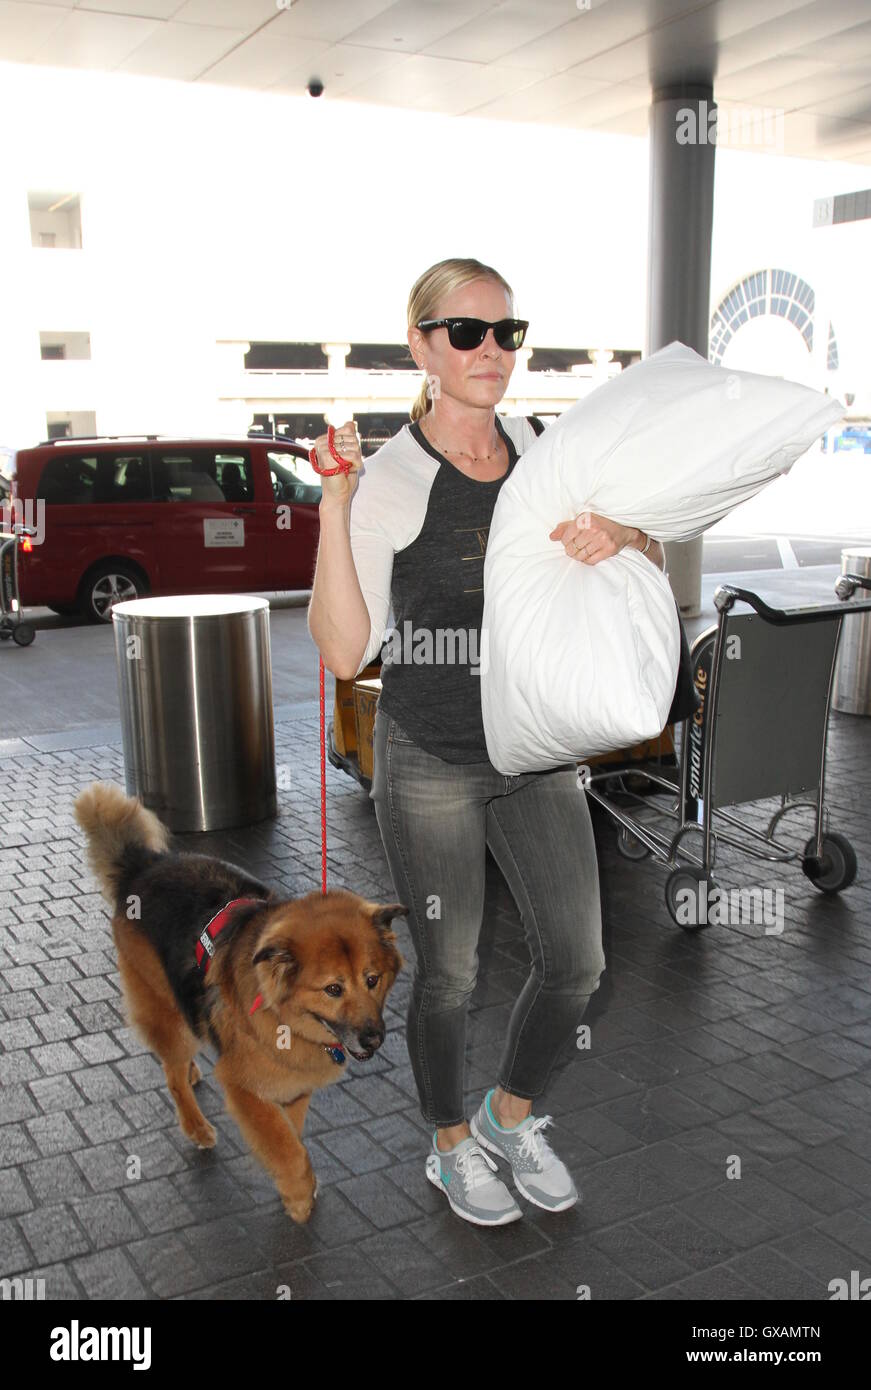 Chelsea Handler Departs From The Airport With Her Dog Featuring Chelsea GXAMTN 